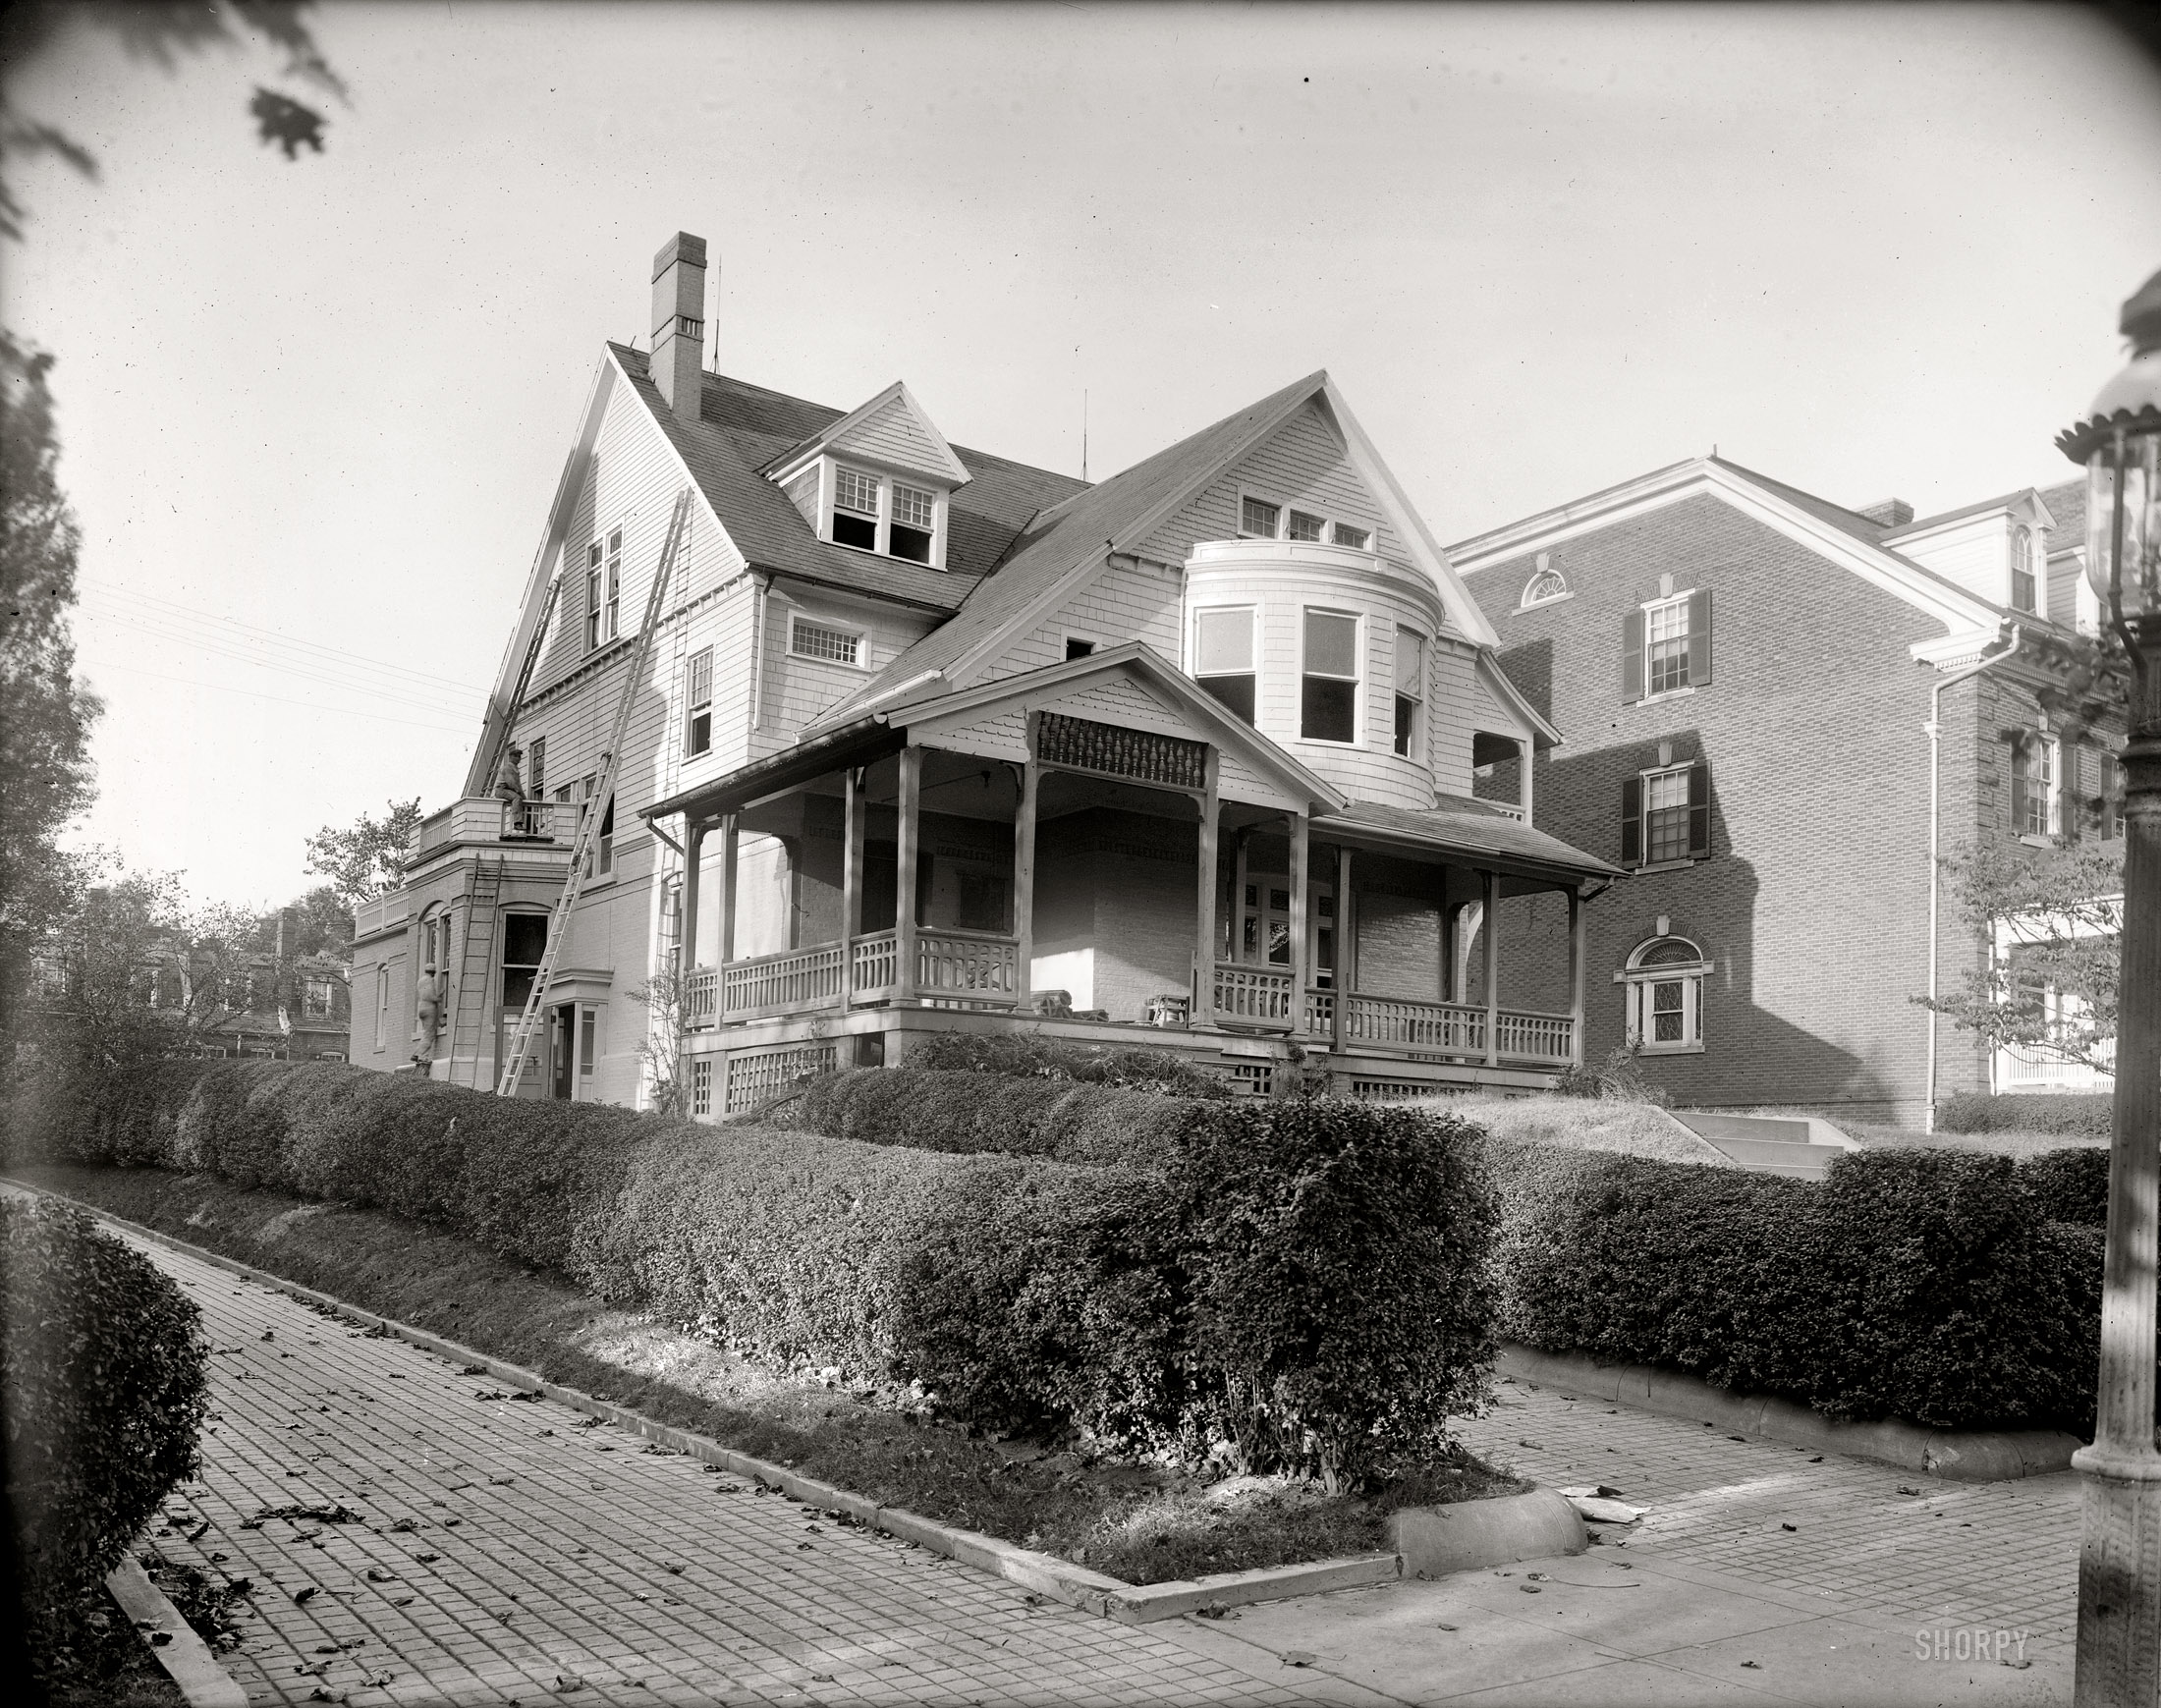 Washington, D.C., circa 1920. "Washington Herald -- Wyoming Avenue." Where is this house? National Photo Company Collection glass negative. View full size.